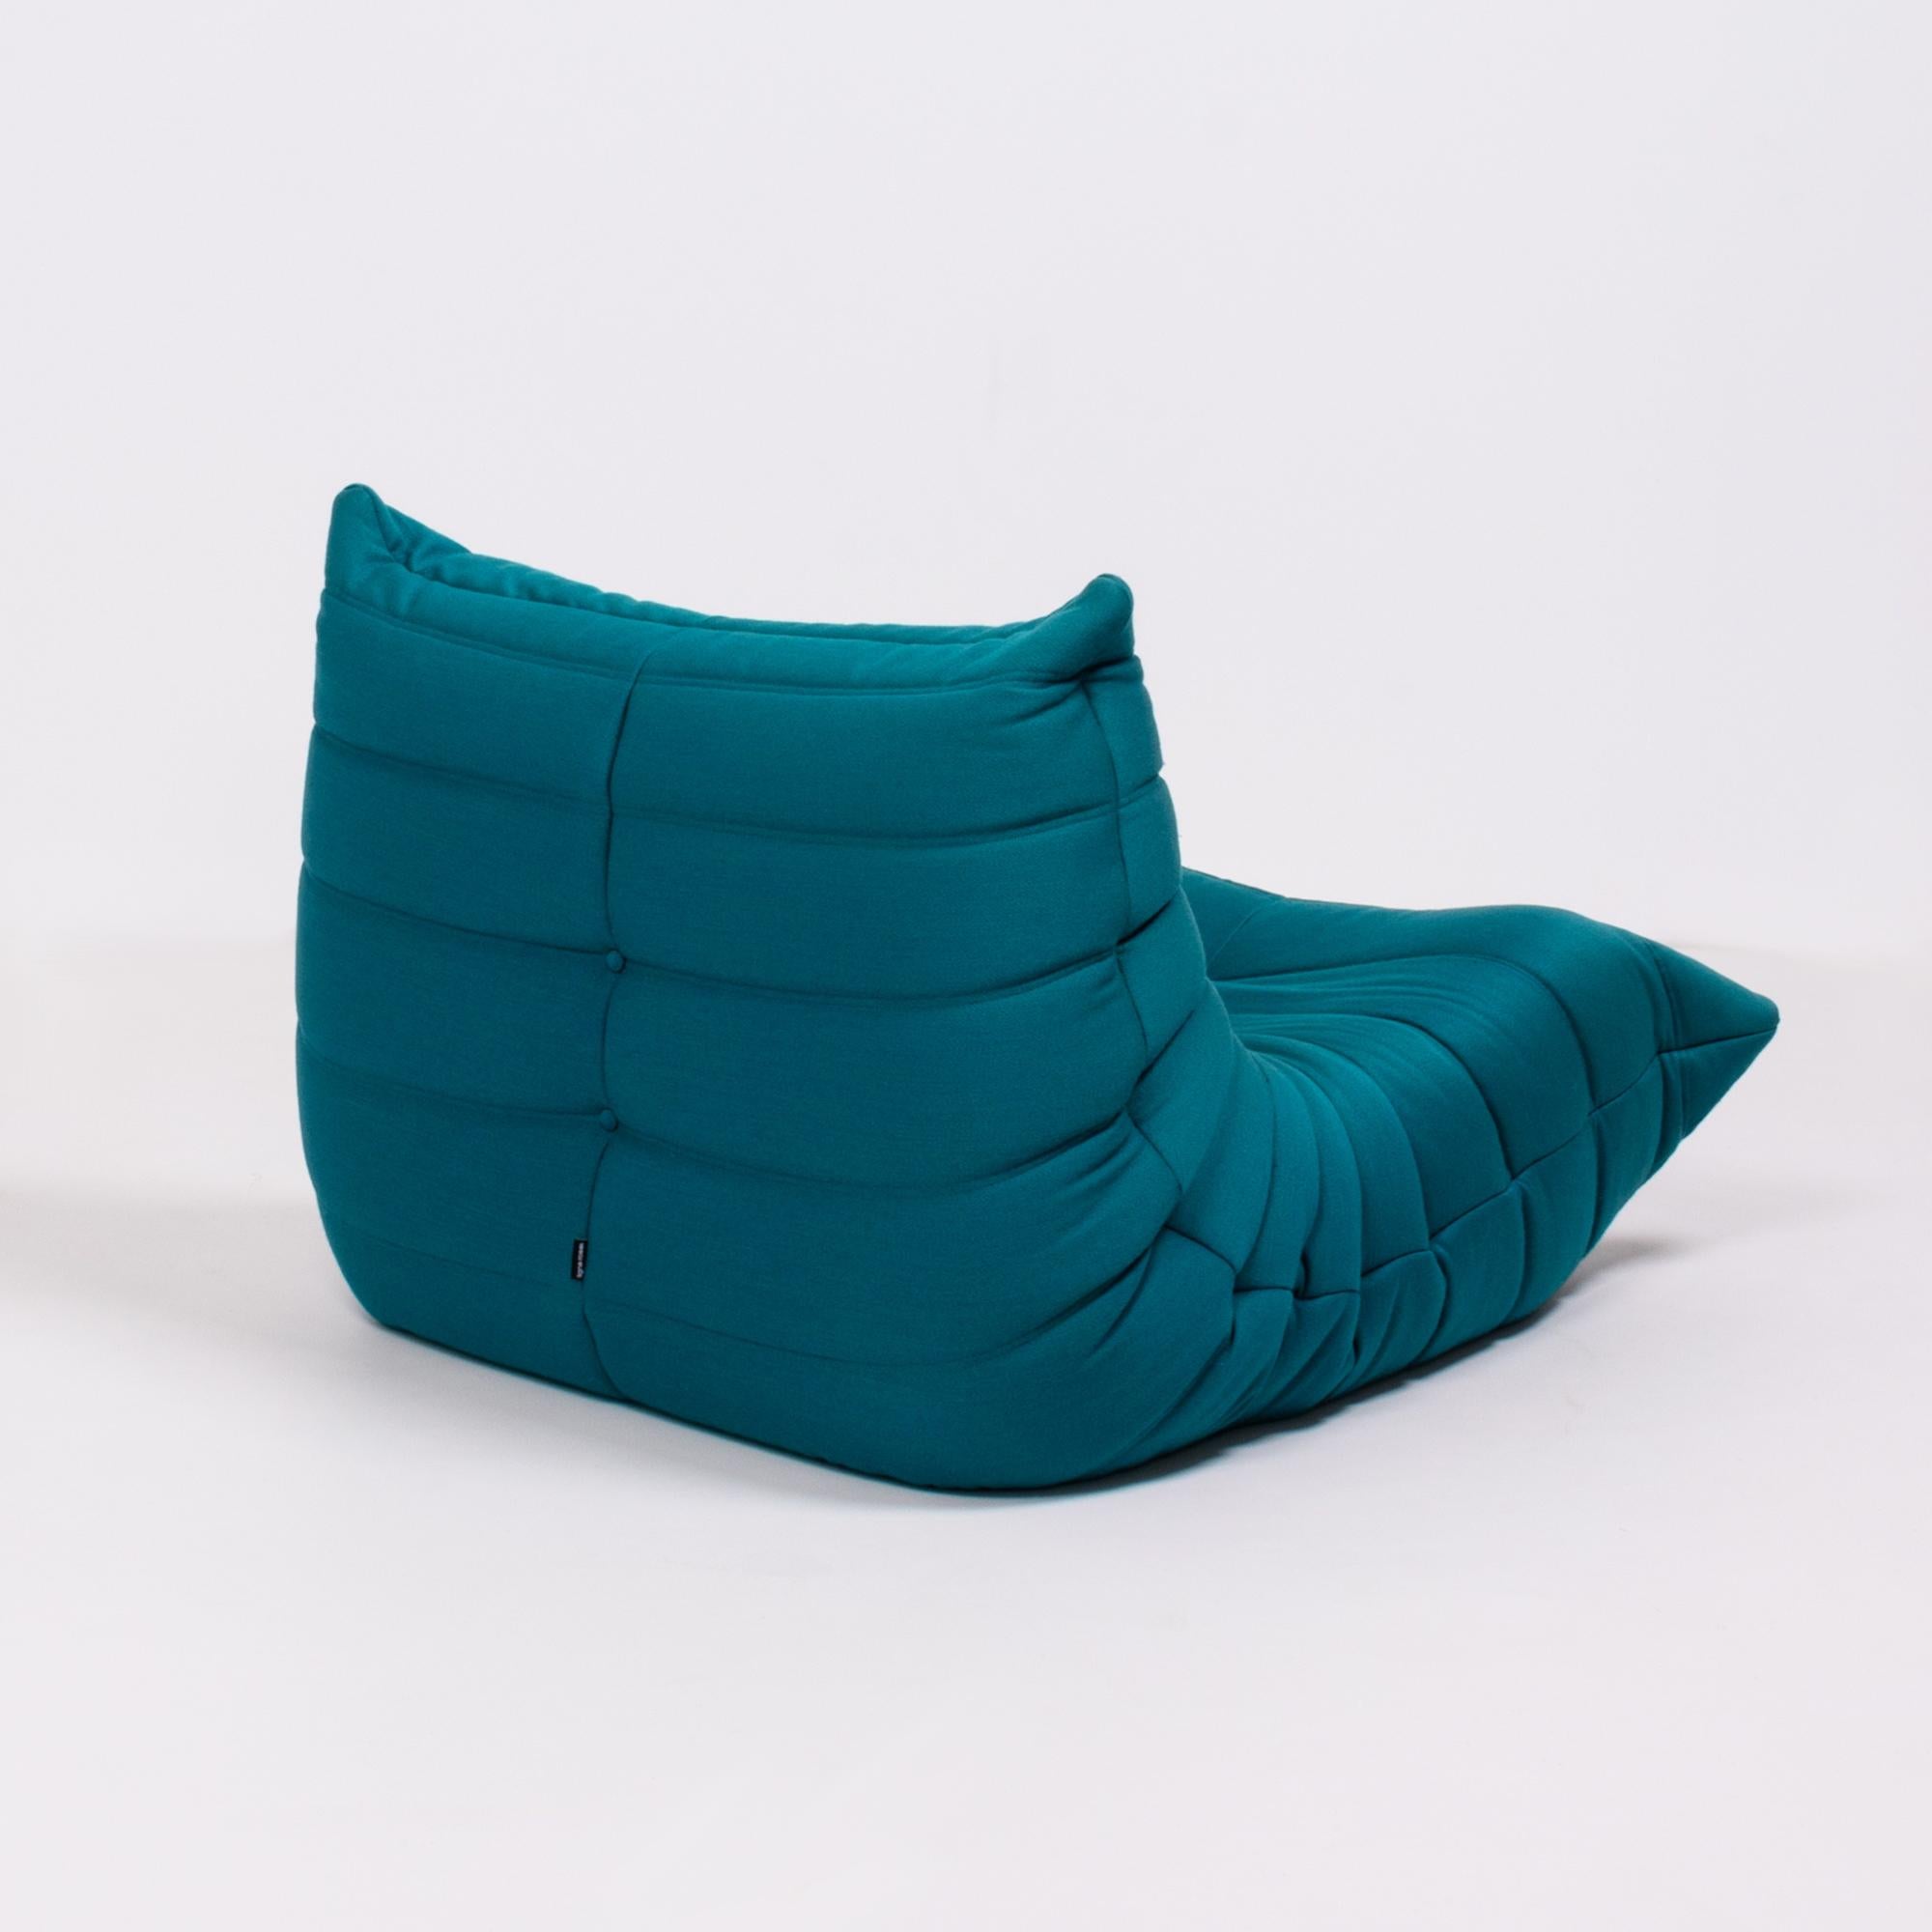 Late 20th Century Togo Teal Armchair and Footstool by Michel Ducaroy for Ligne Roset, Set of 2